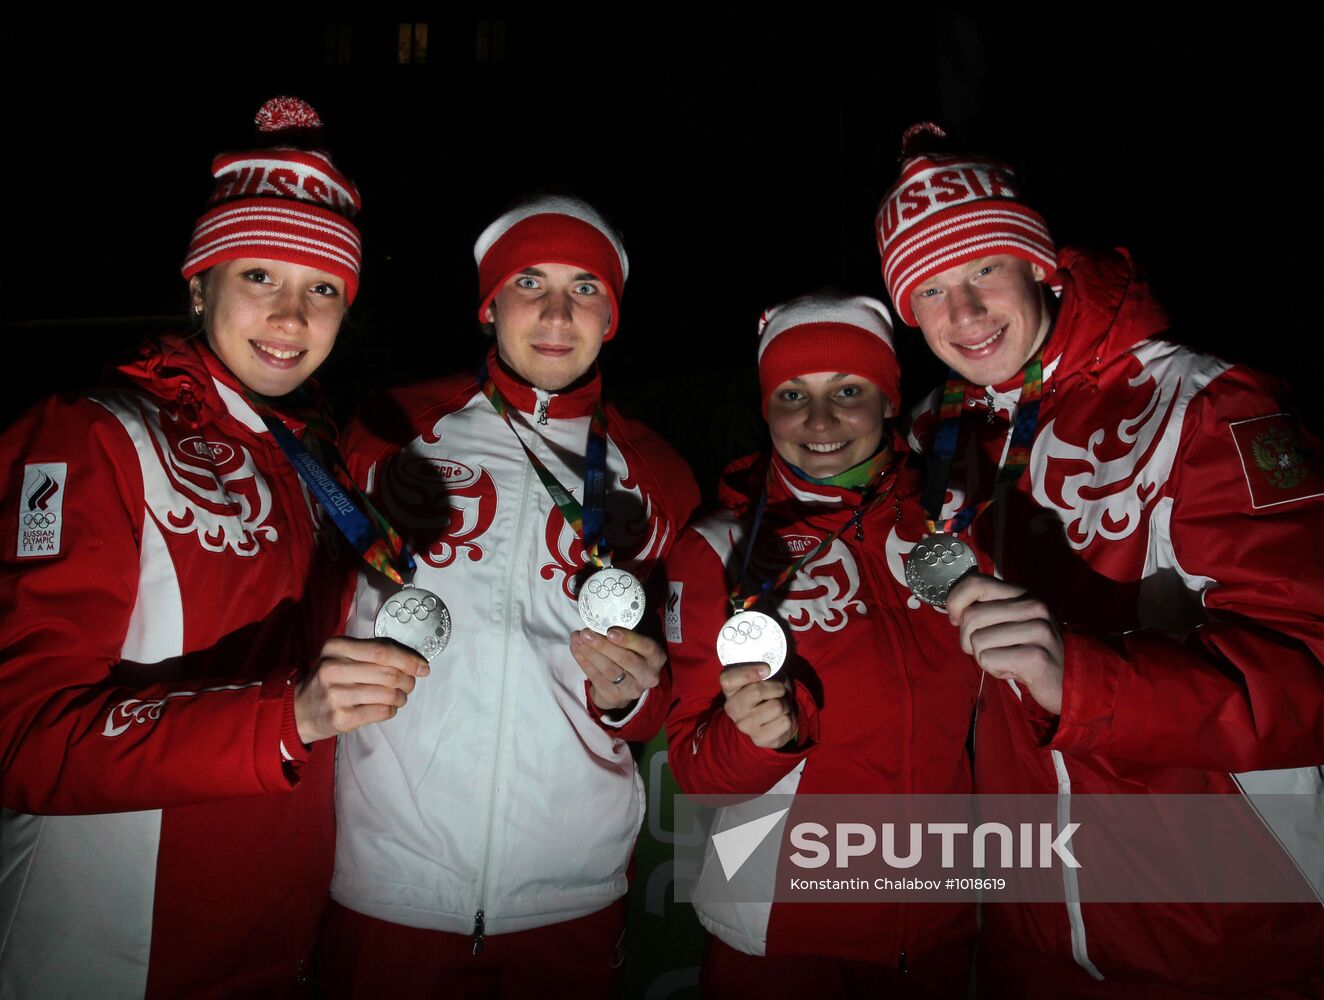 2012 Winter Youth Olympic Games. Awarding ceremony